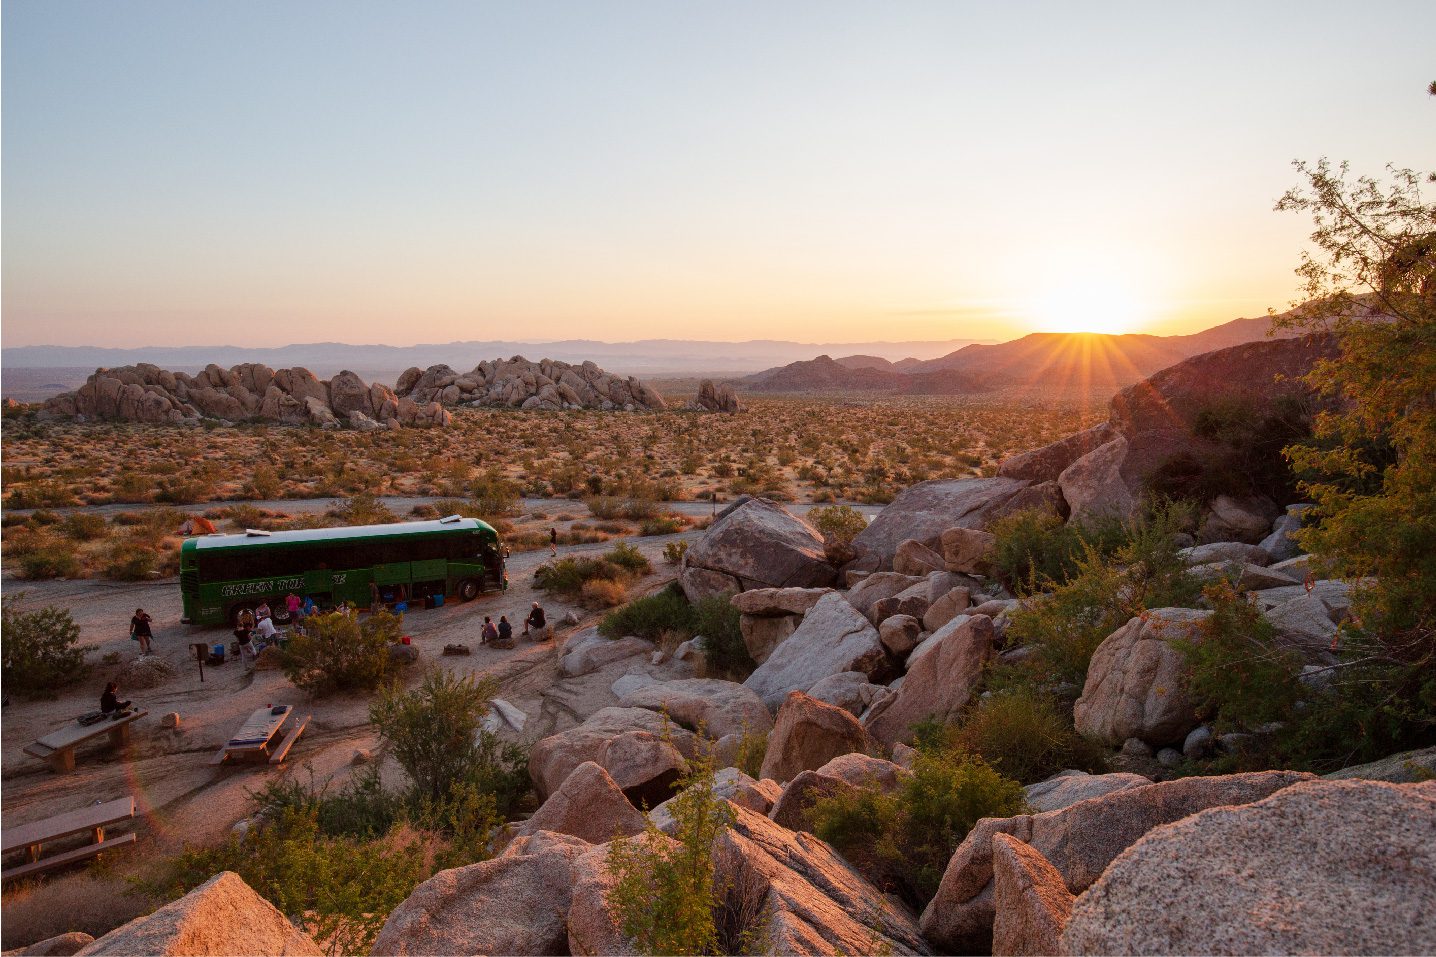 A group of explorers visiting Joshua Tree National park relax during a sunset. The mid-size group is lounging around the Green Tortoise adventure bus.